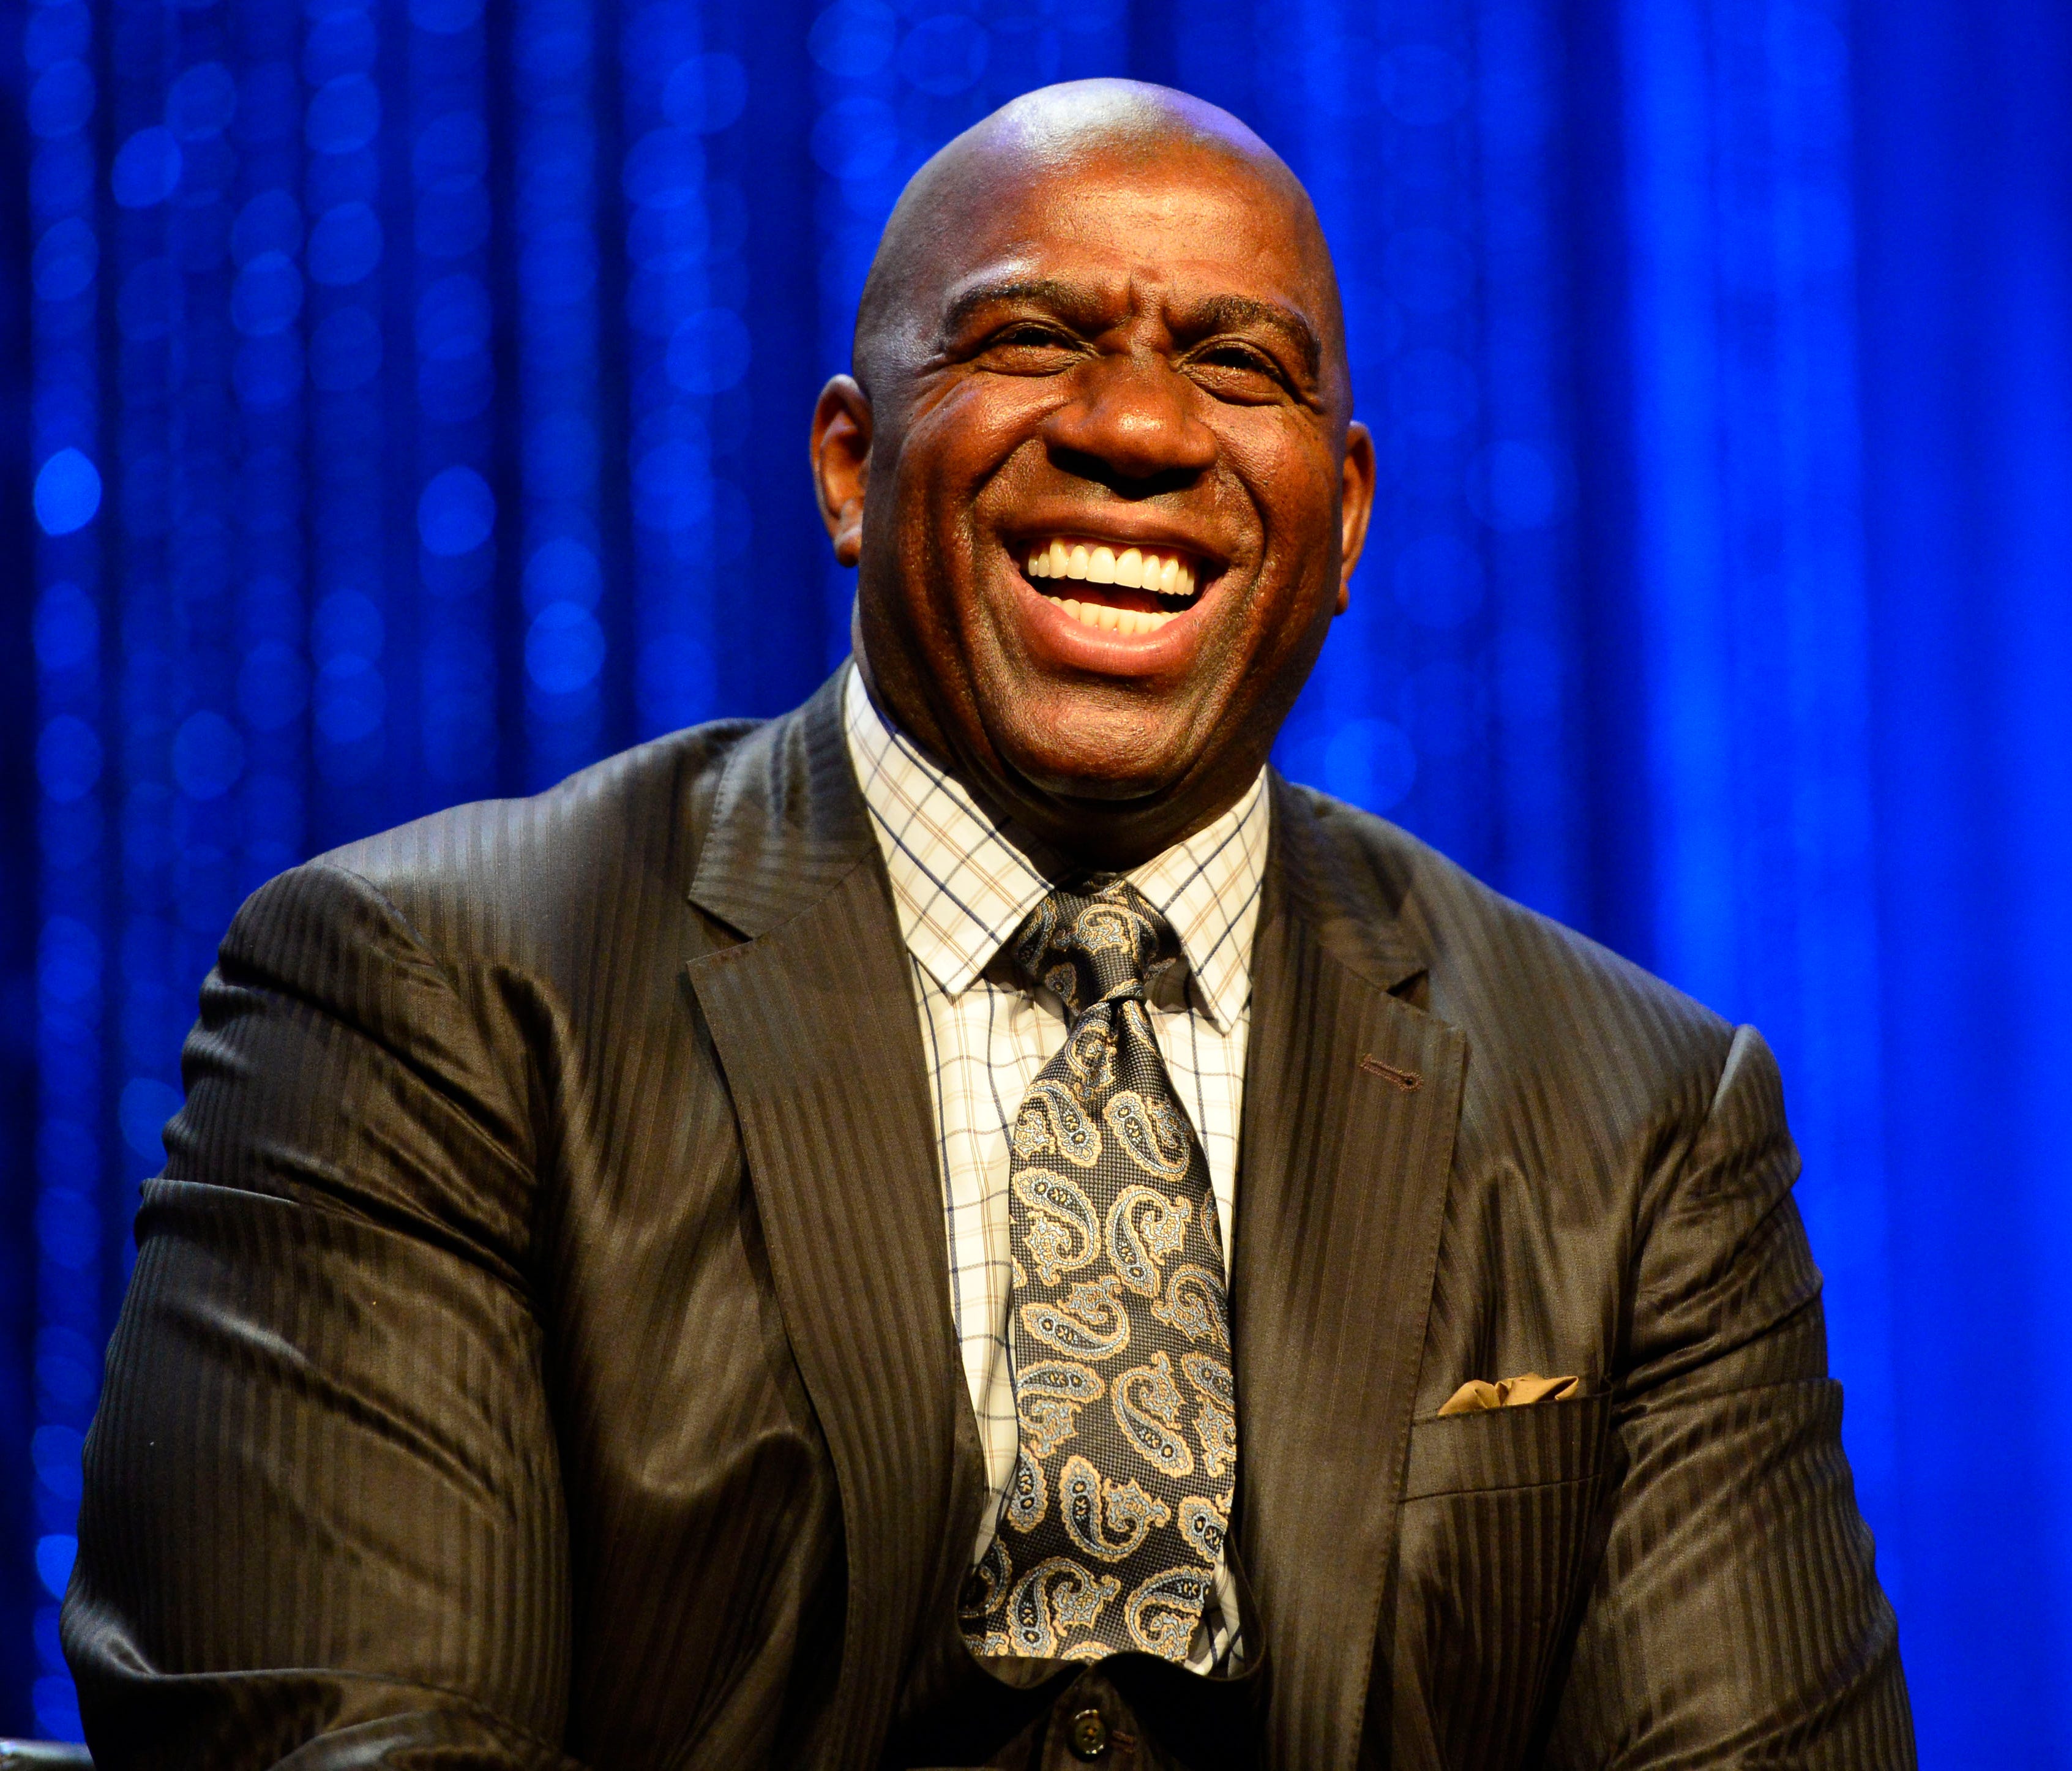 Magic Johnson laughs during the 2014 NBA All-Star Game Legends Brunch.